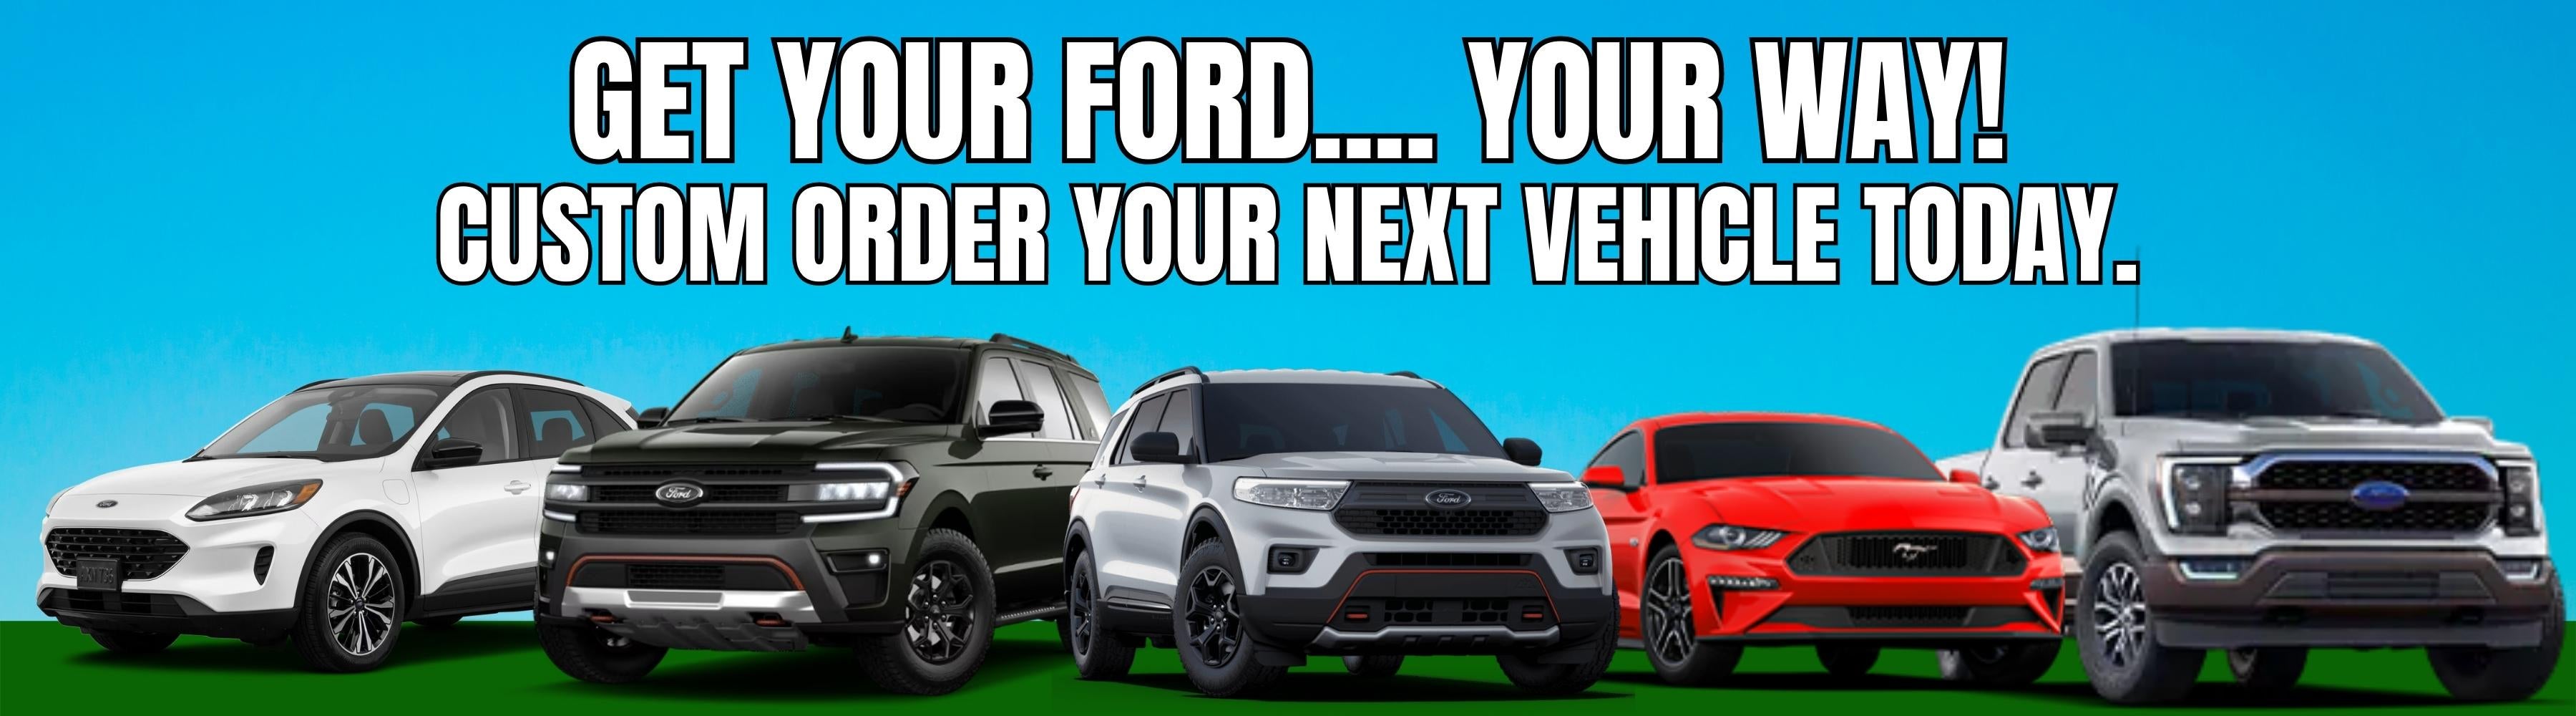 get your ford your way custom order your next vehicle banner